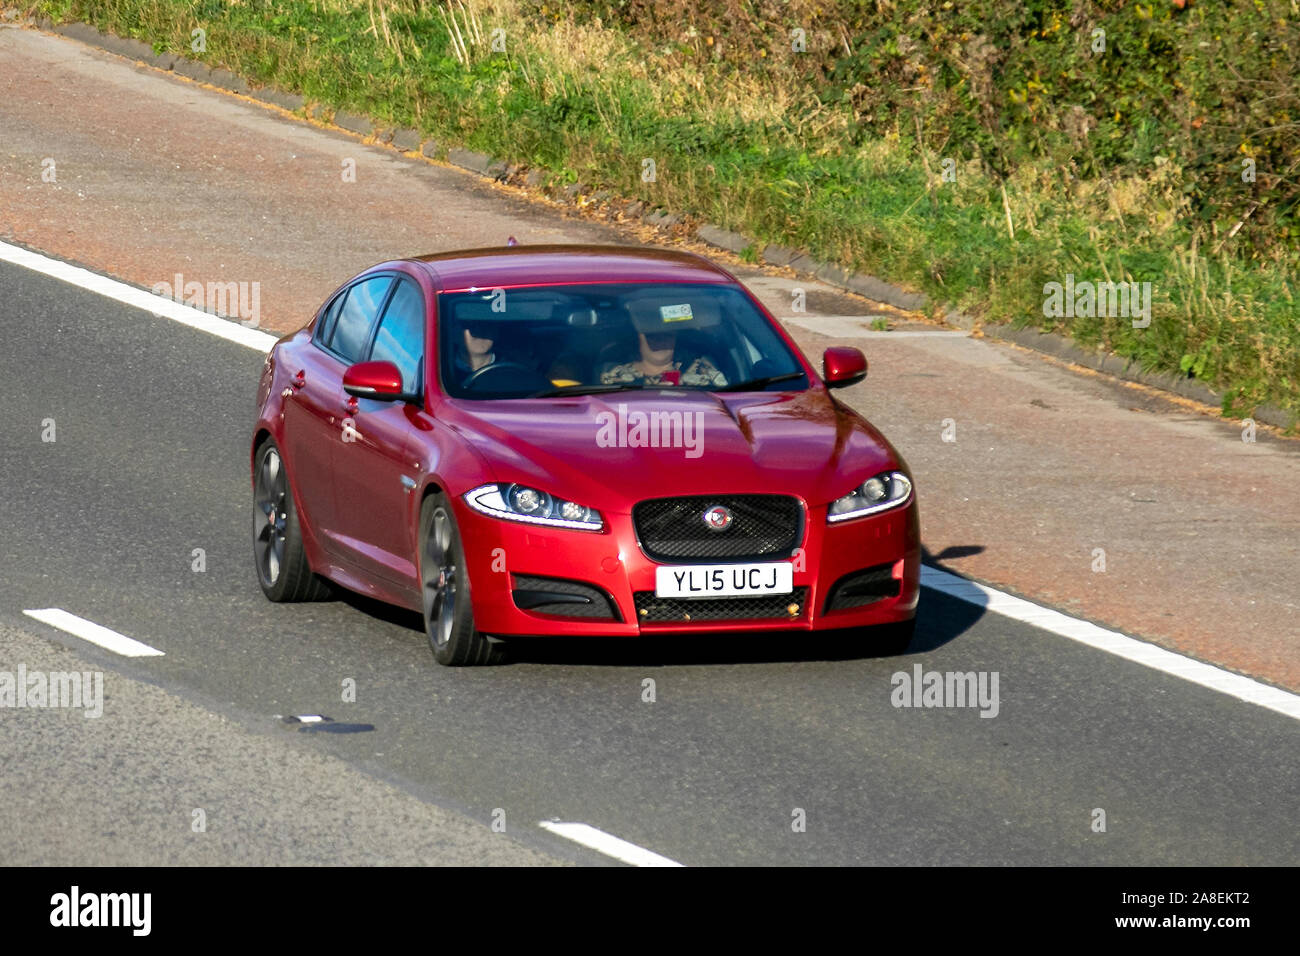 2015 red Jaguar XF R-Sport D Auto; Vehicular traffic, transport, modern, saloon cars, south-bound on the 3 lane M6 motorway highway. Stock Photo